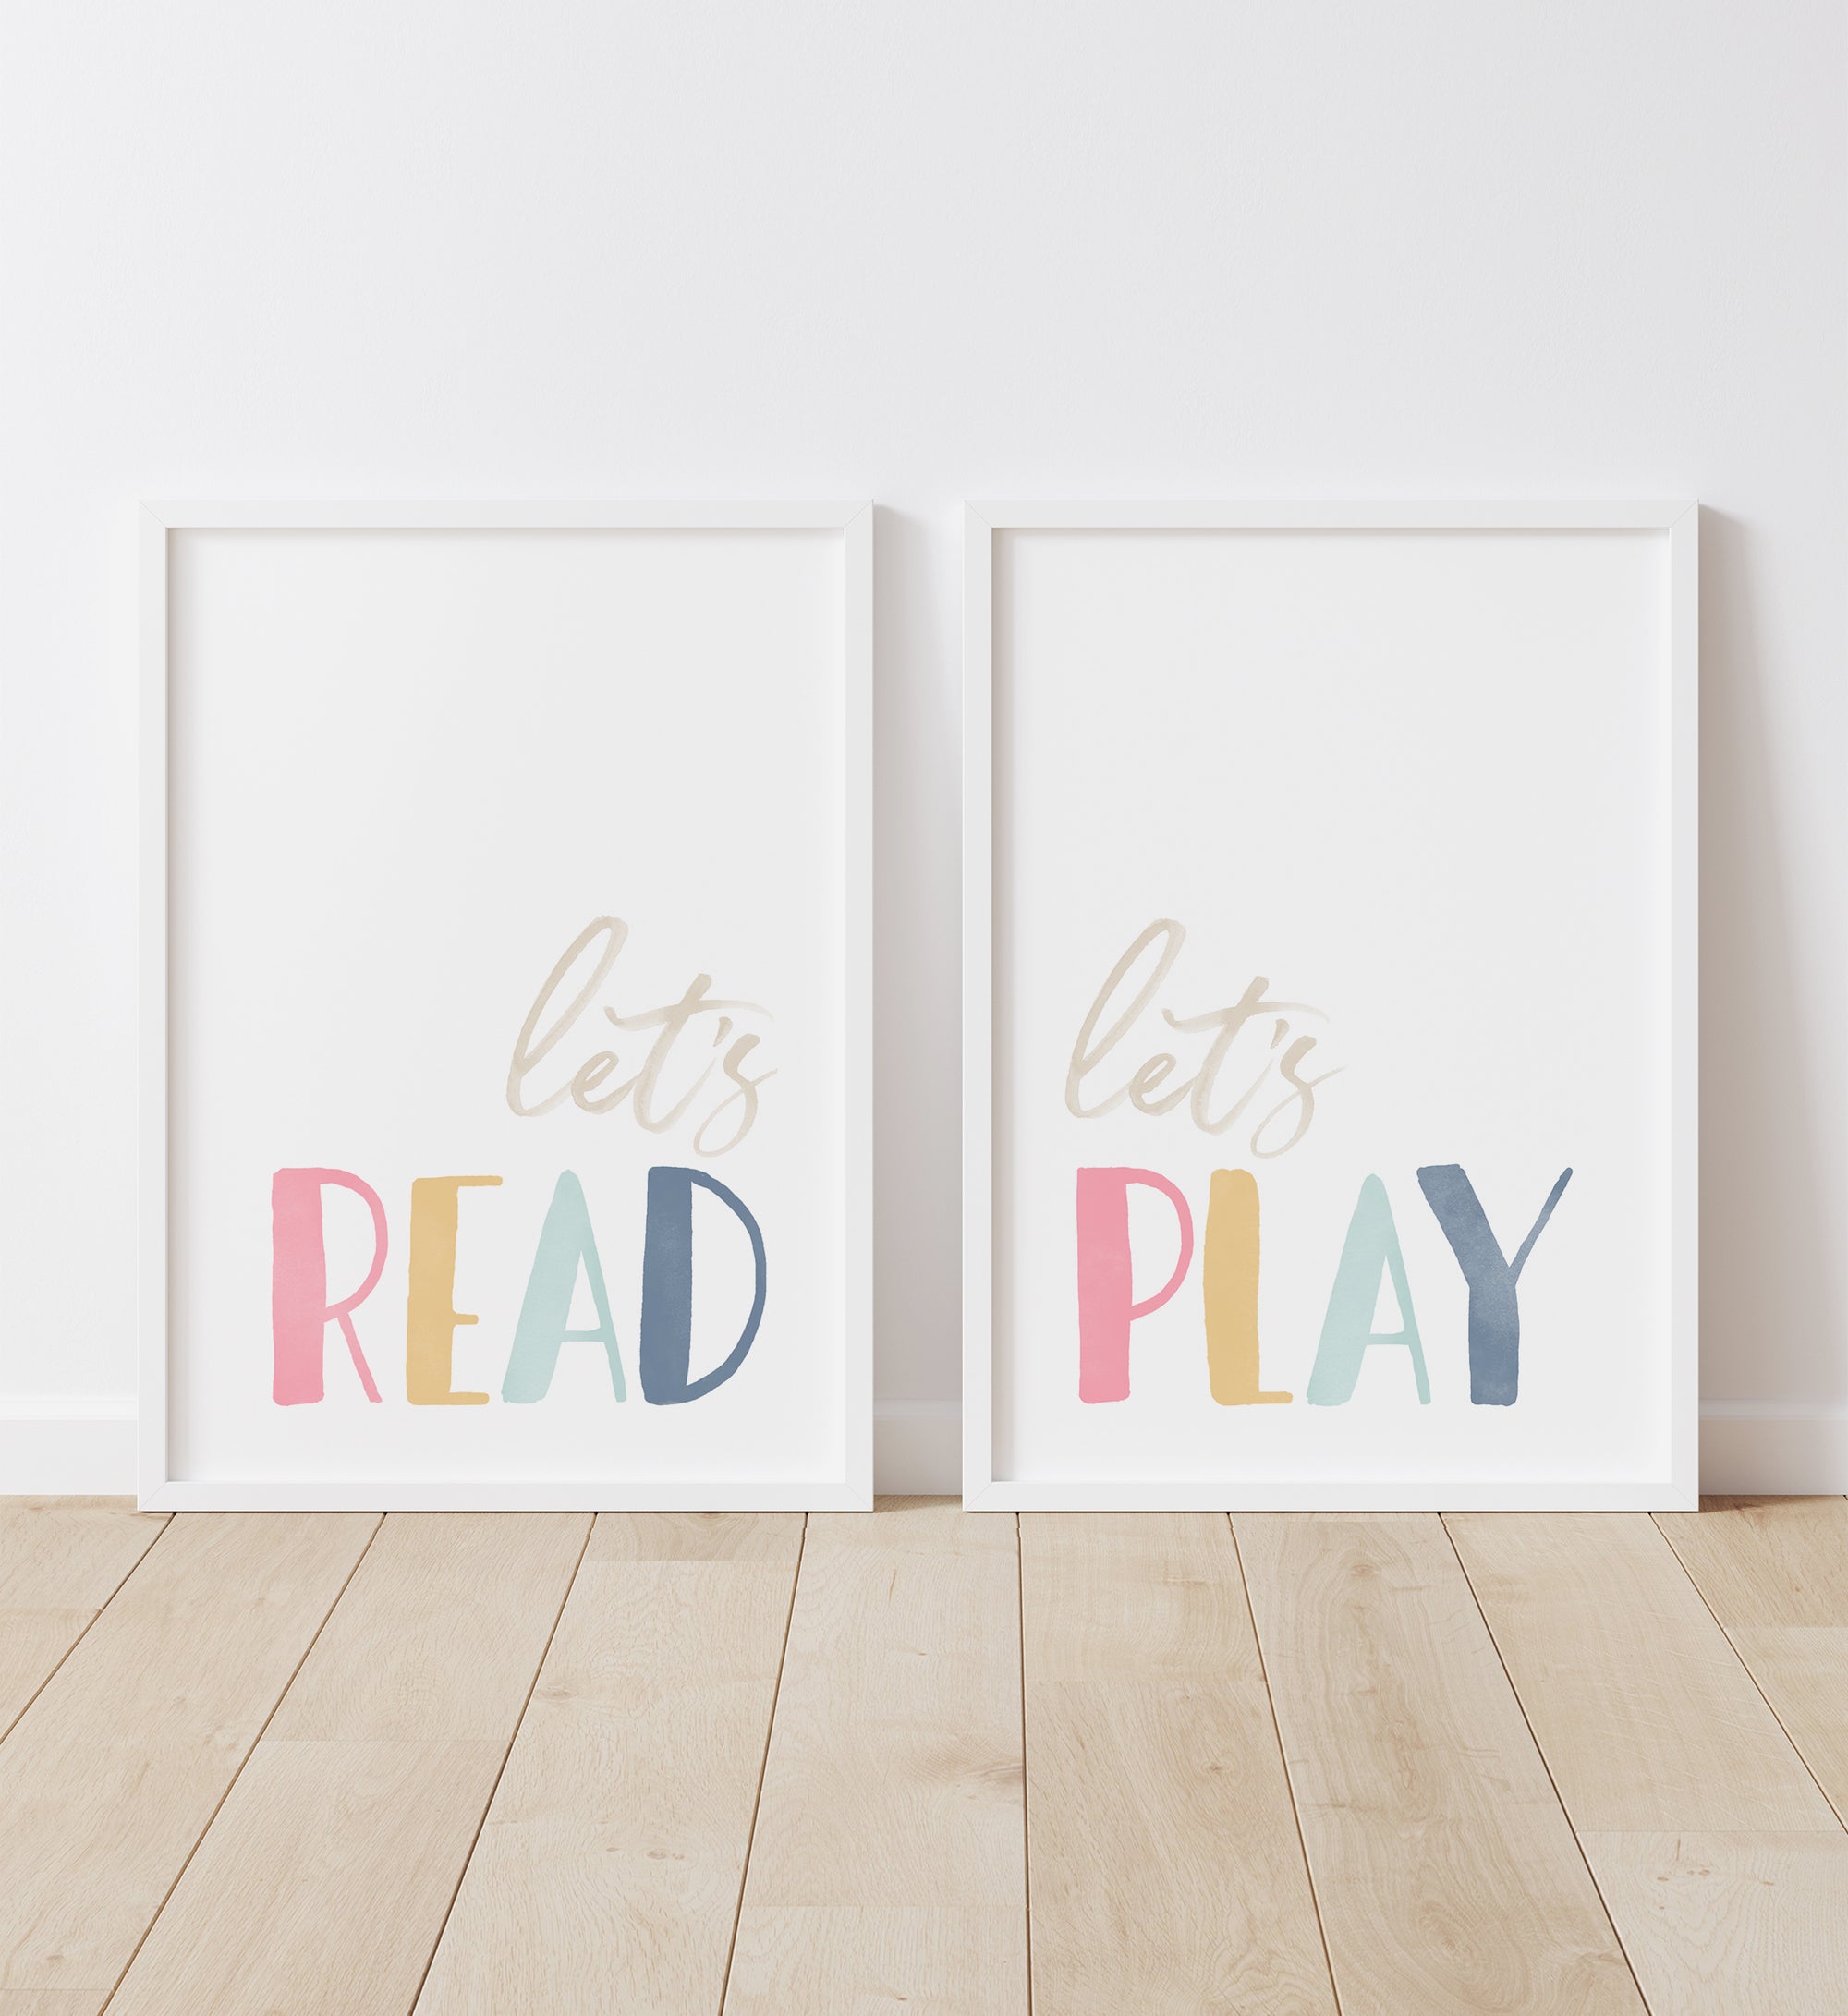 Let's Read, Let's Play Set of 2 Prints - SDCP